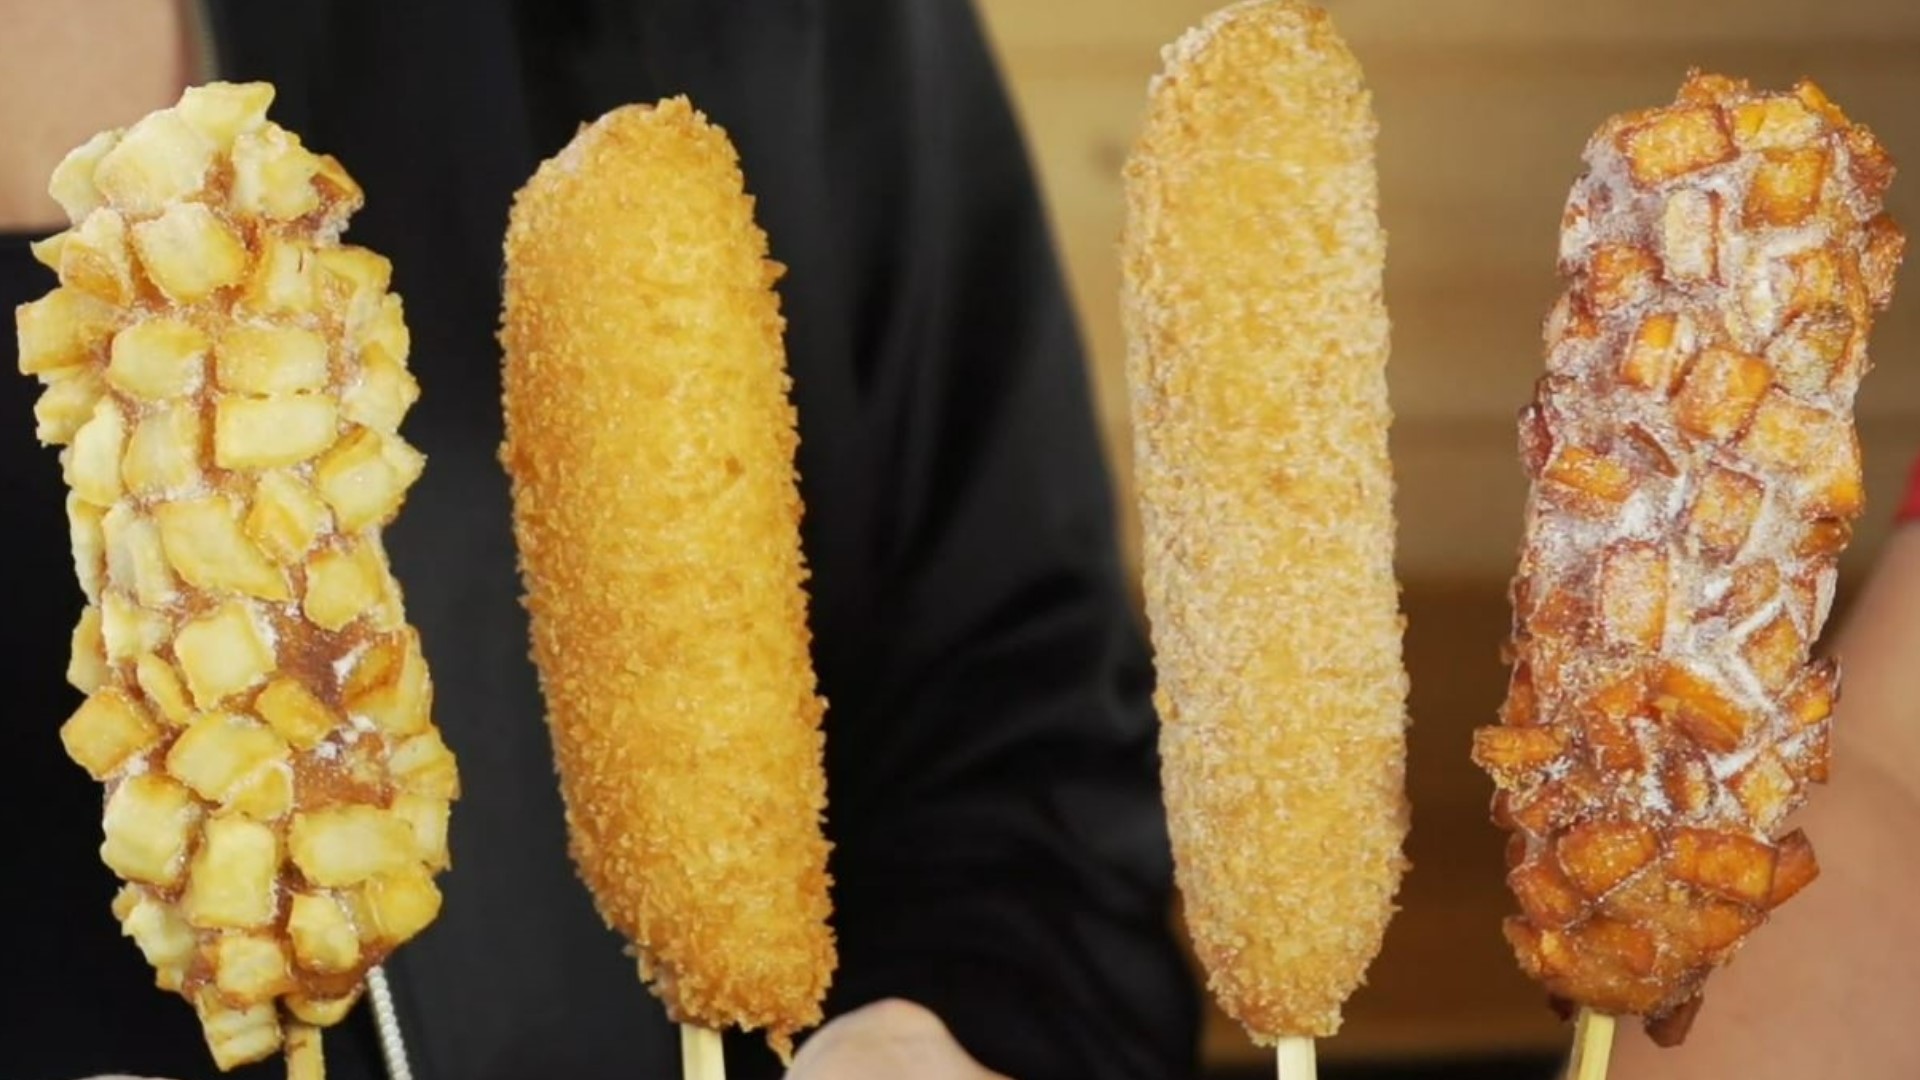 They look like corndogs, but Seoul HotDog's batter is made from rice flour and topped with sugar. #k5evening